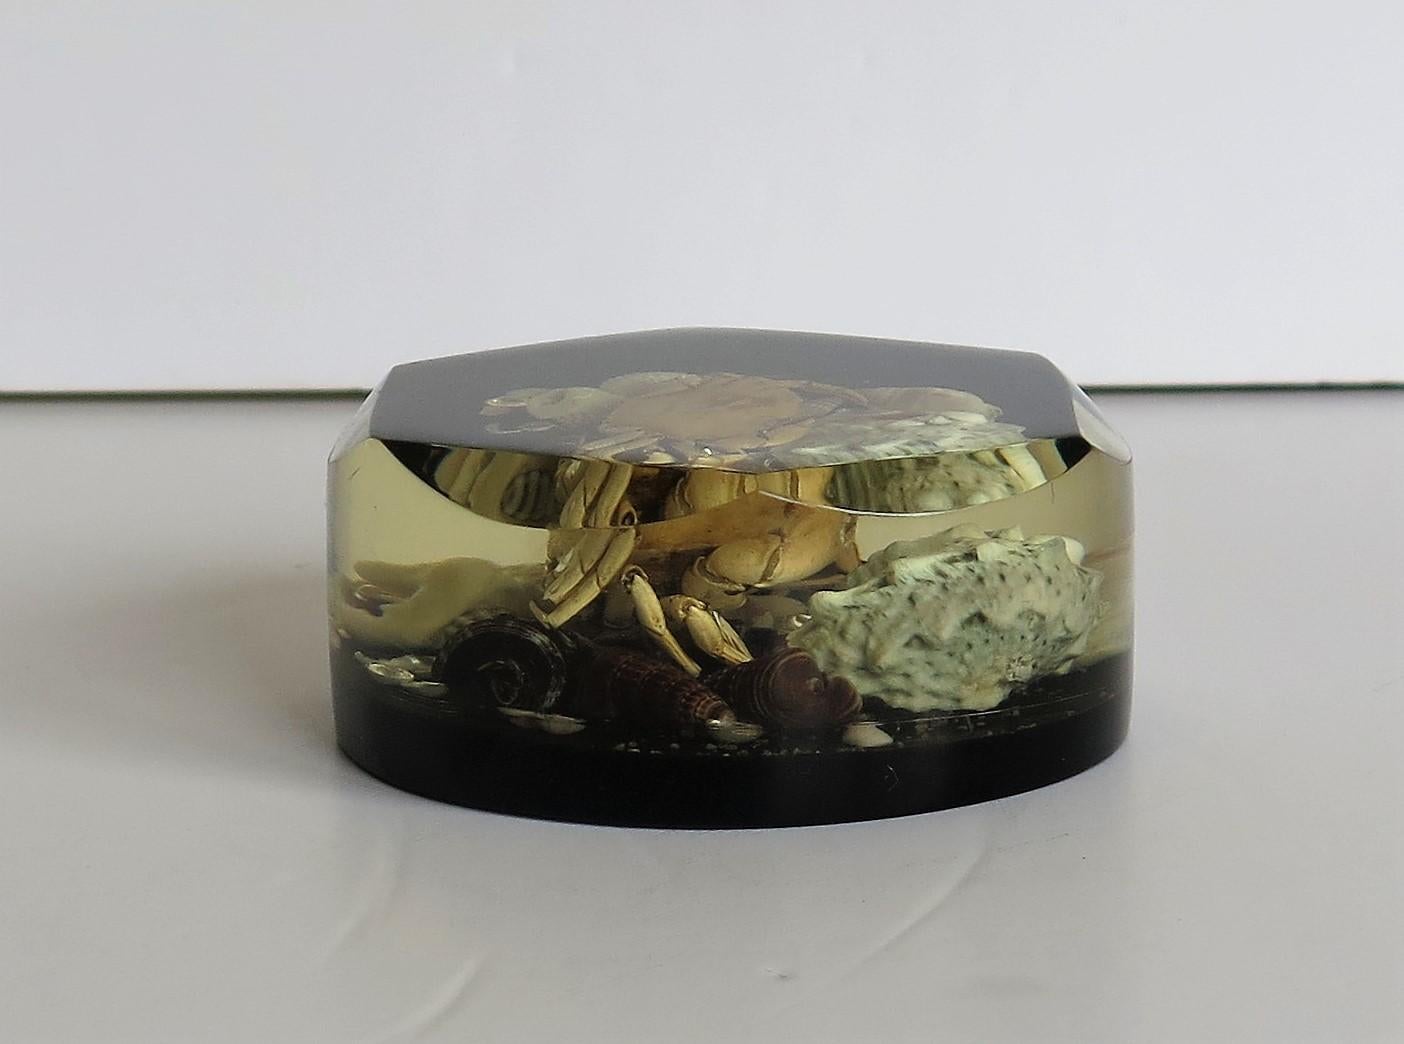 Acrylic Paperweight with Seashore Theme Handmade with Real Sea Shells & Crab, circa 1970 For Sale